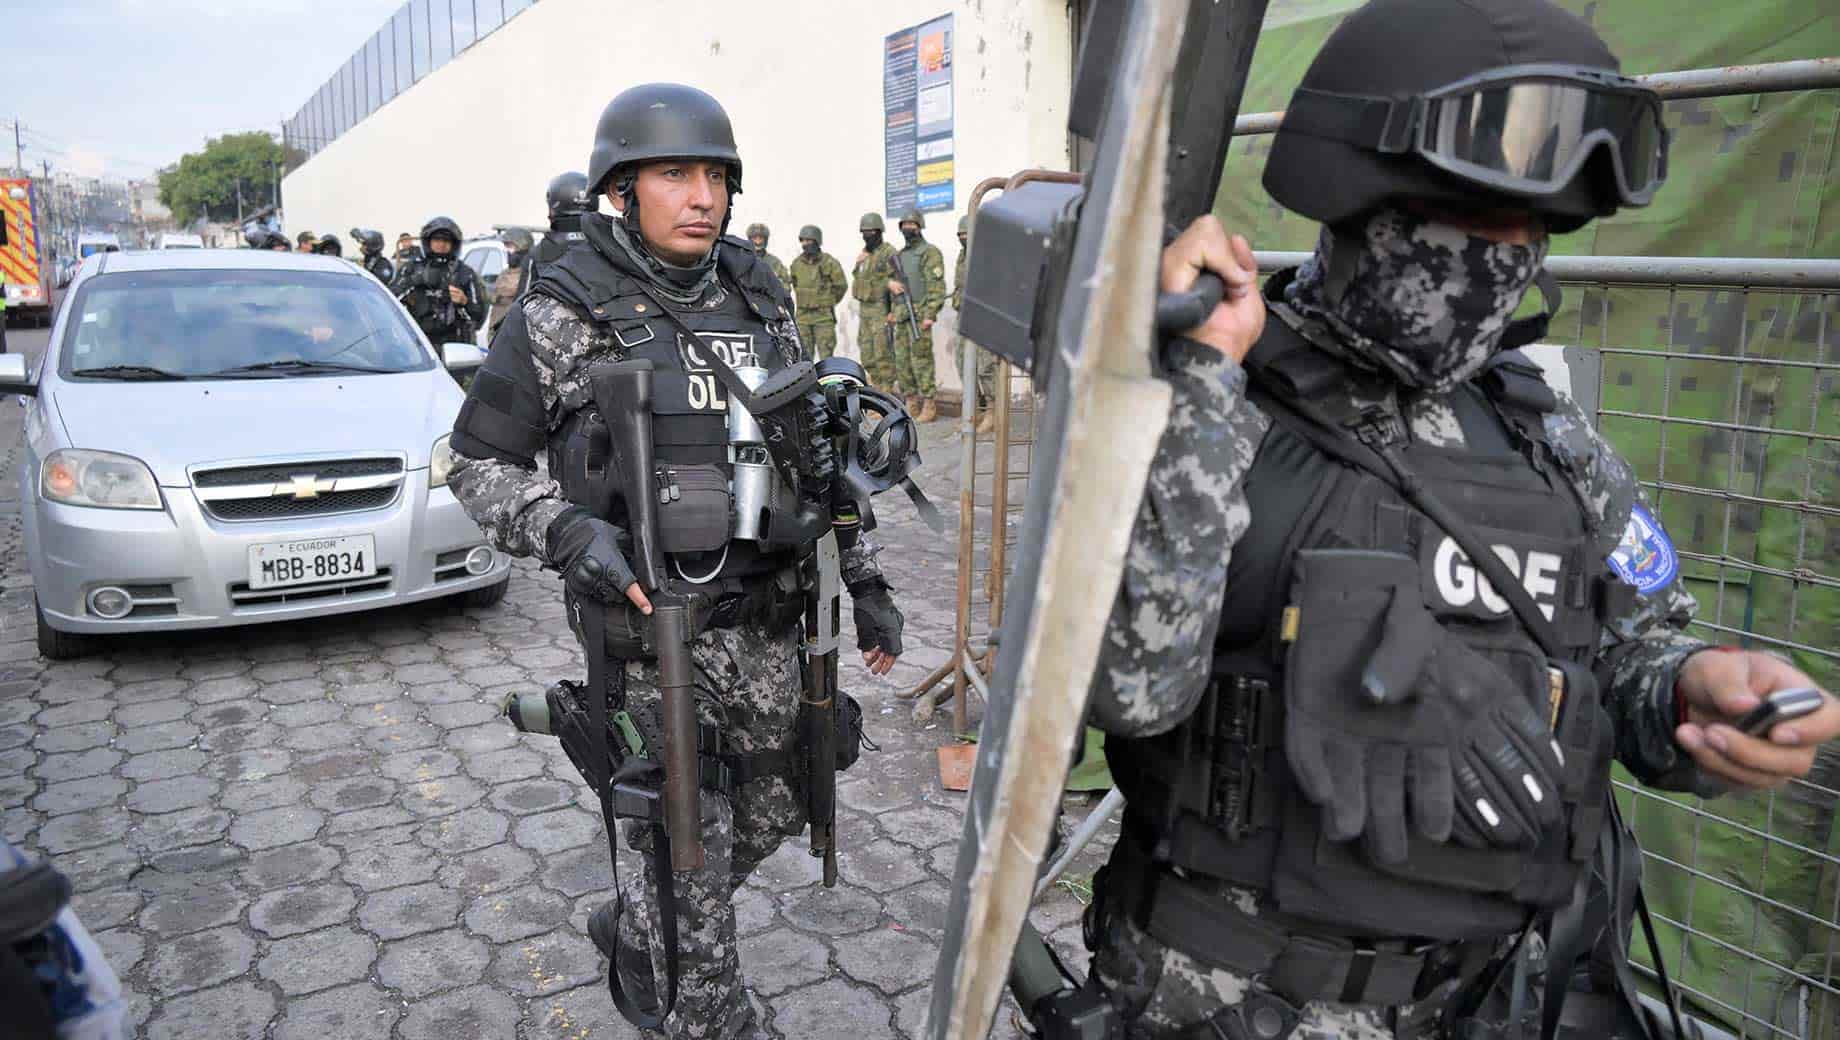 Ecuador The Most Dangerous Country in Latin America?